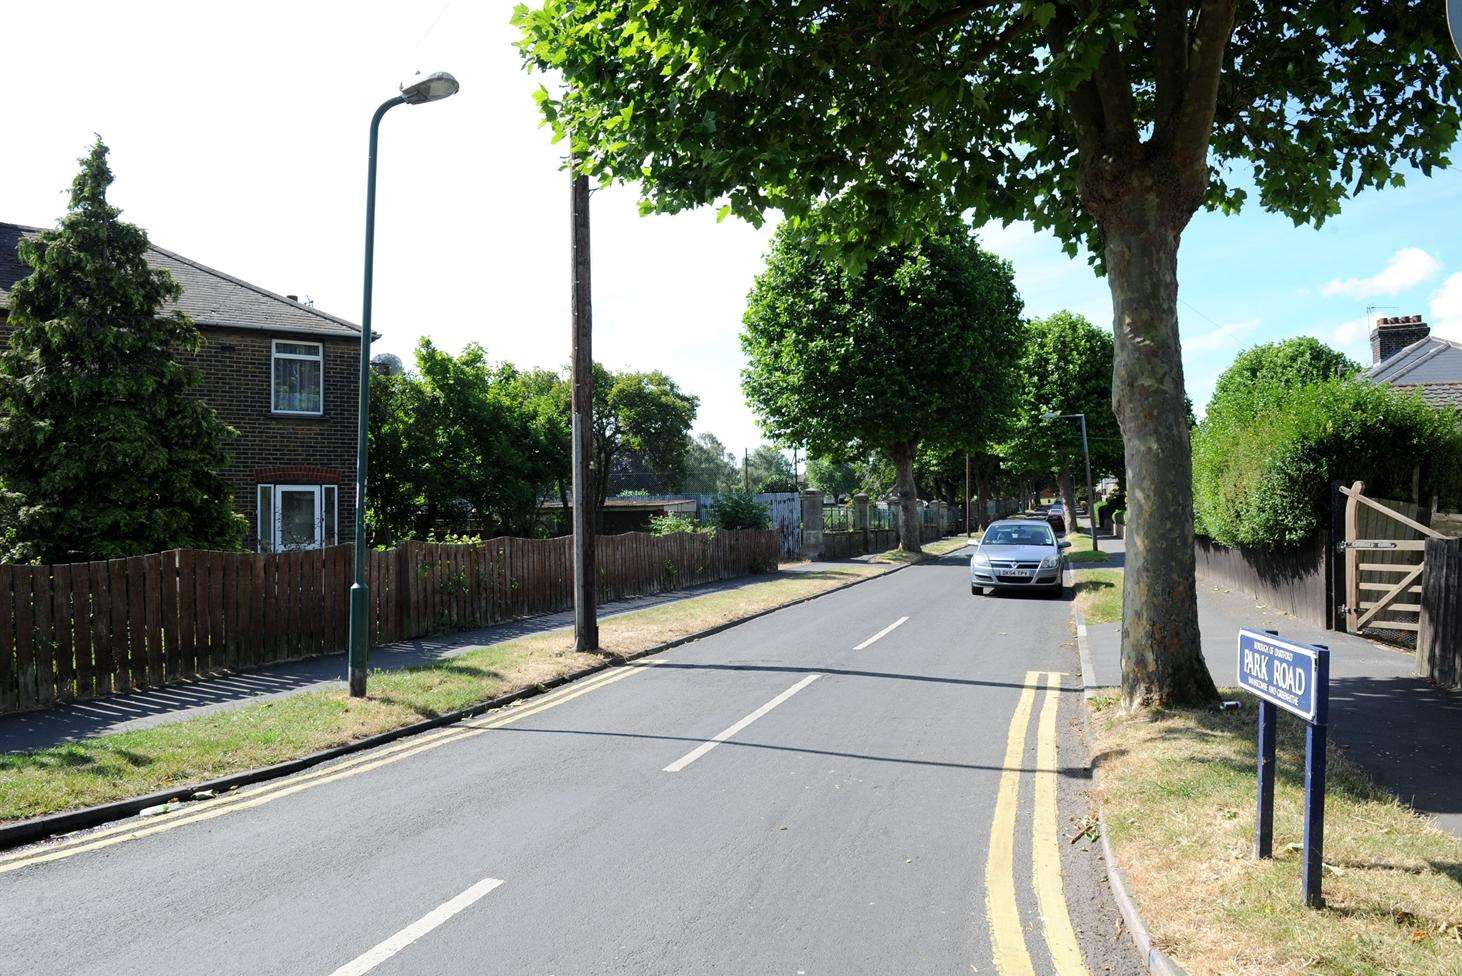 Park Road in Swanscombe was one of the roads where street lights were switched off in error by KCC